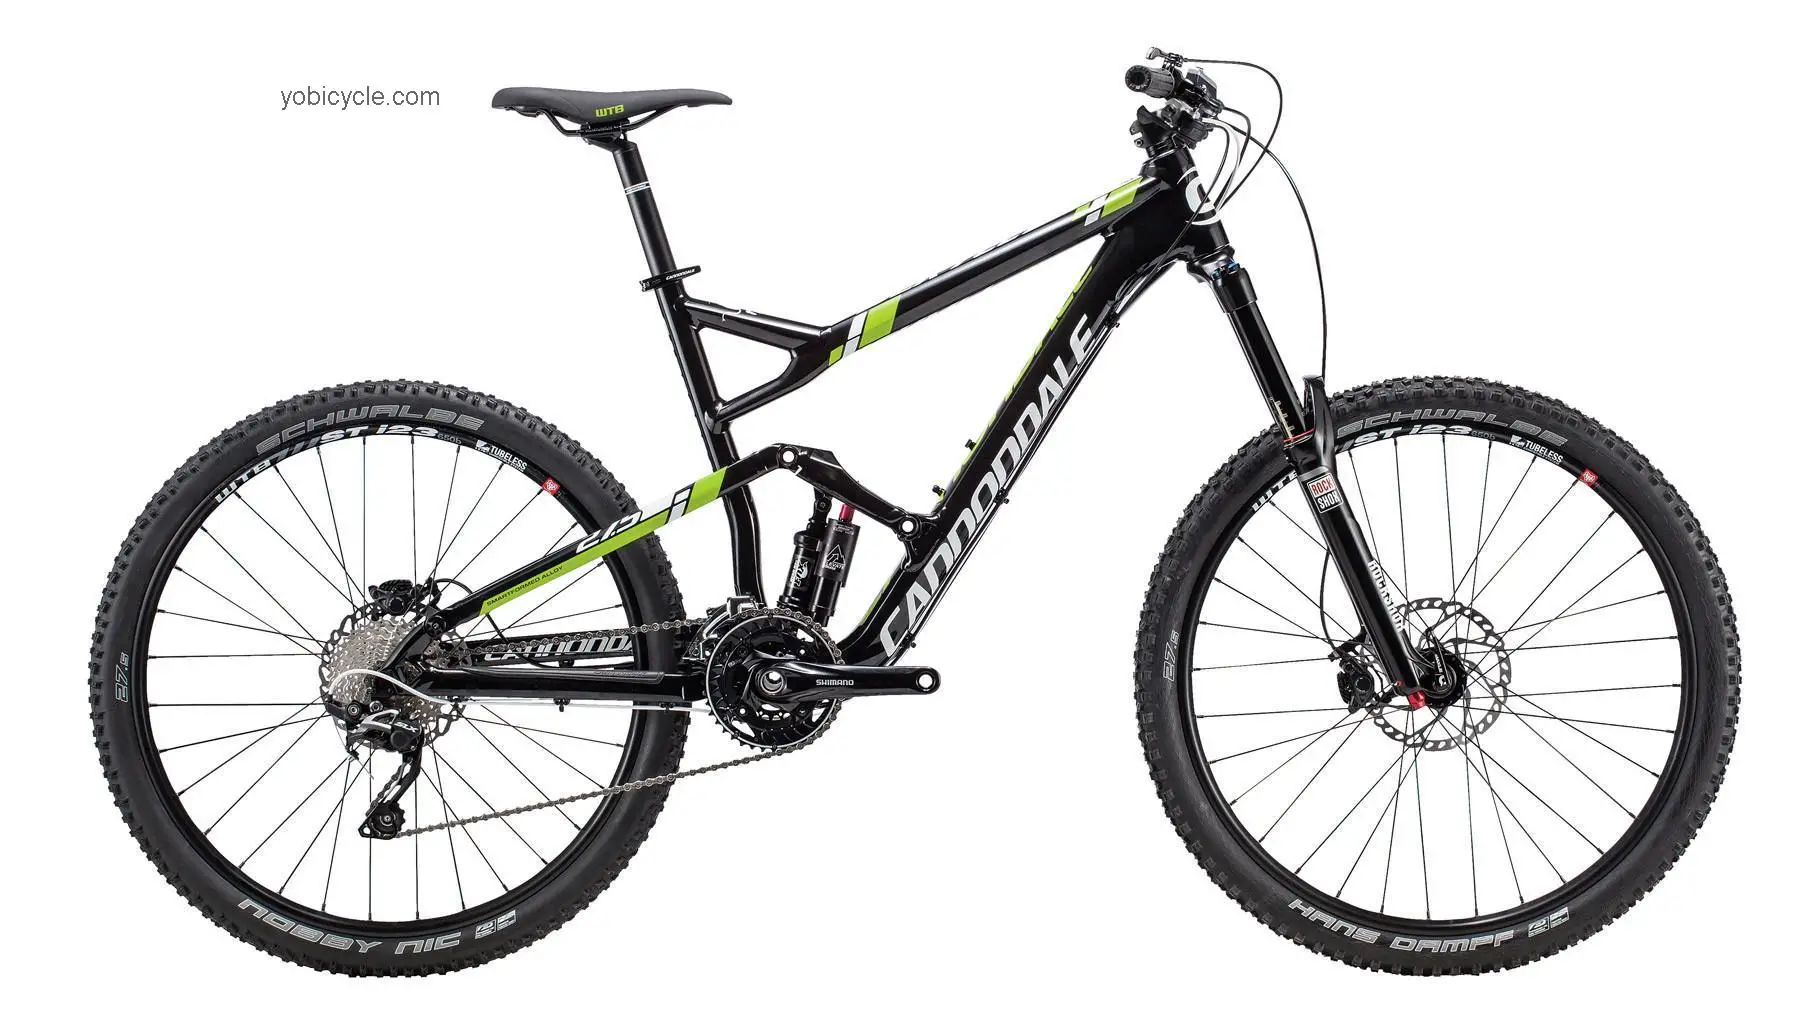 Cannondale JEKYLL 4 2015 comparison online with competitors